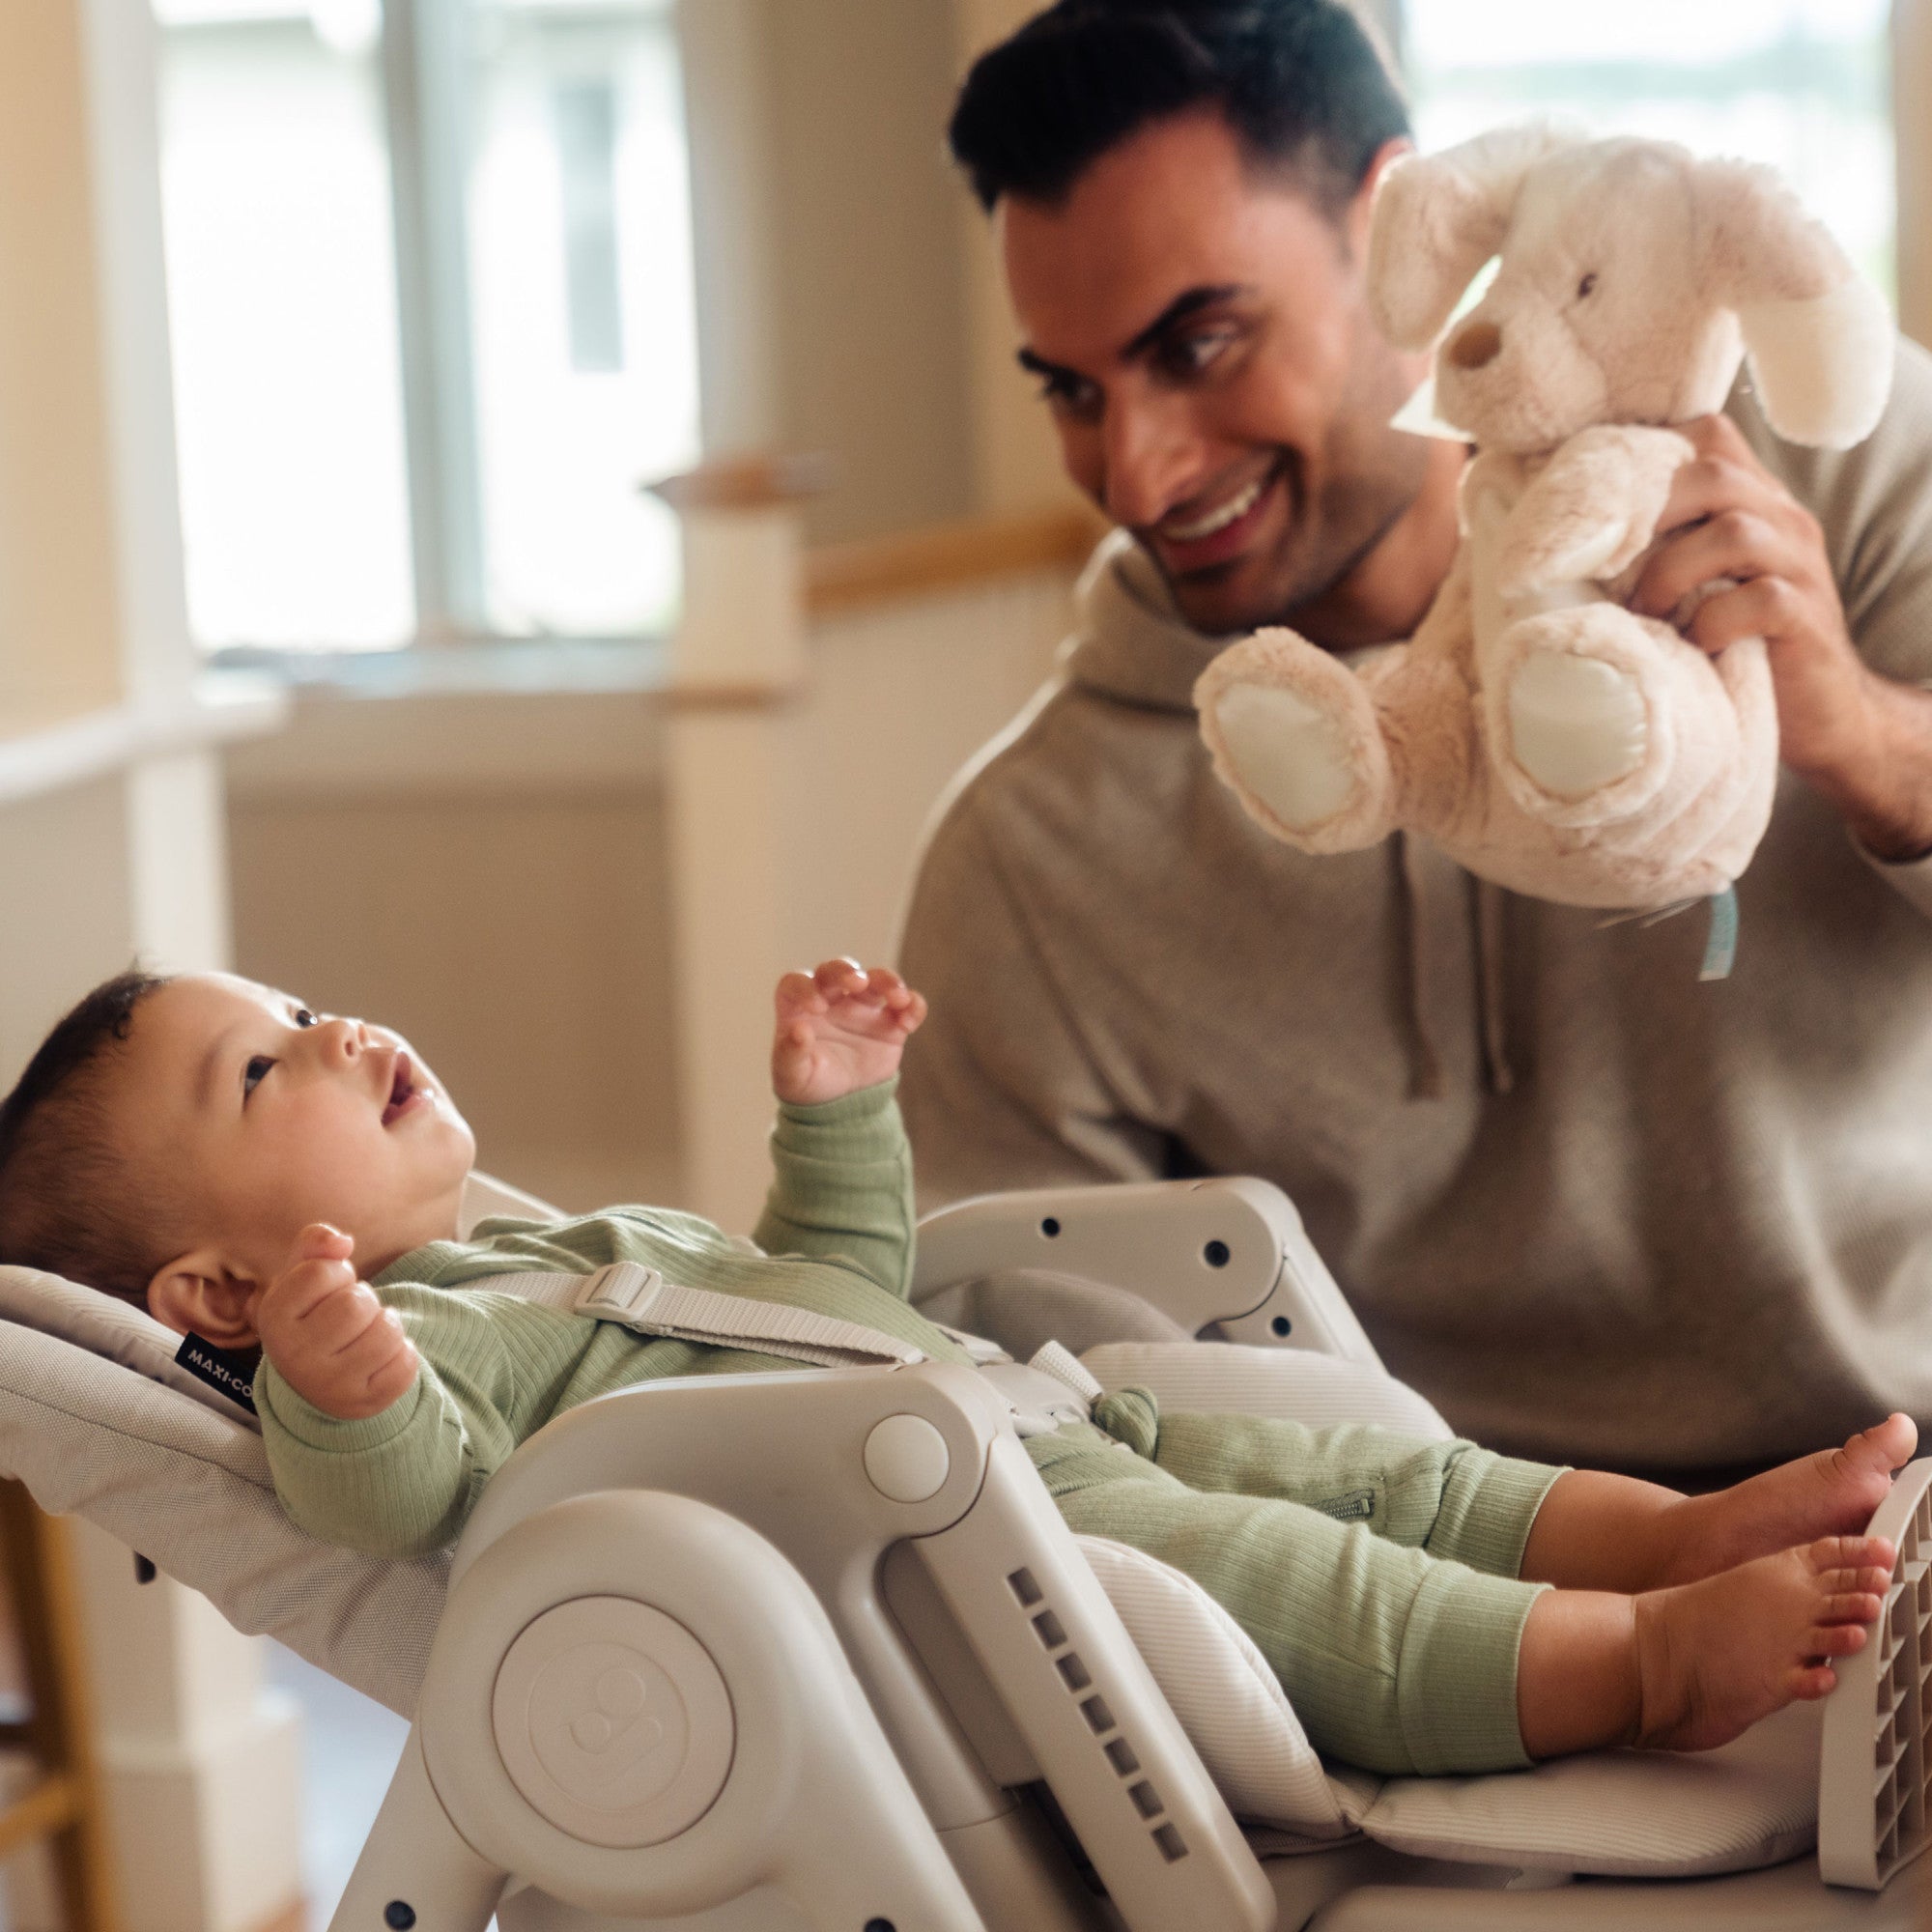 Minla 6-In-1 High Chair - baby reclining in high chair and father entertaining him with stuffed animal